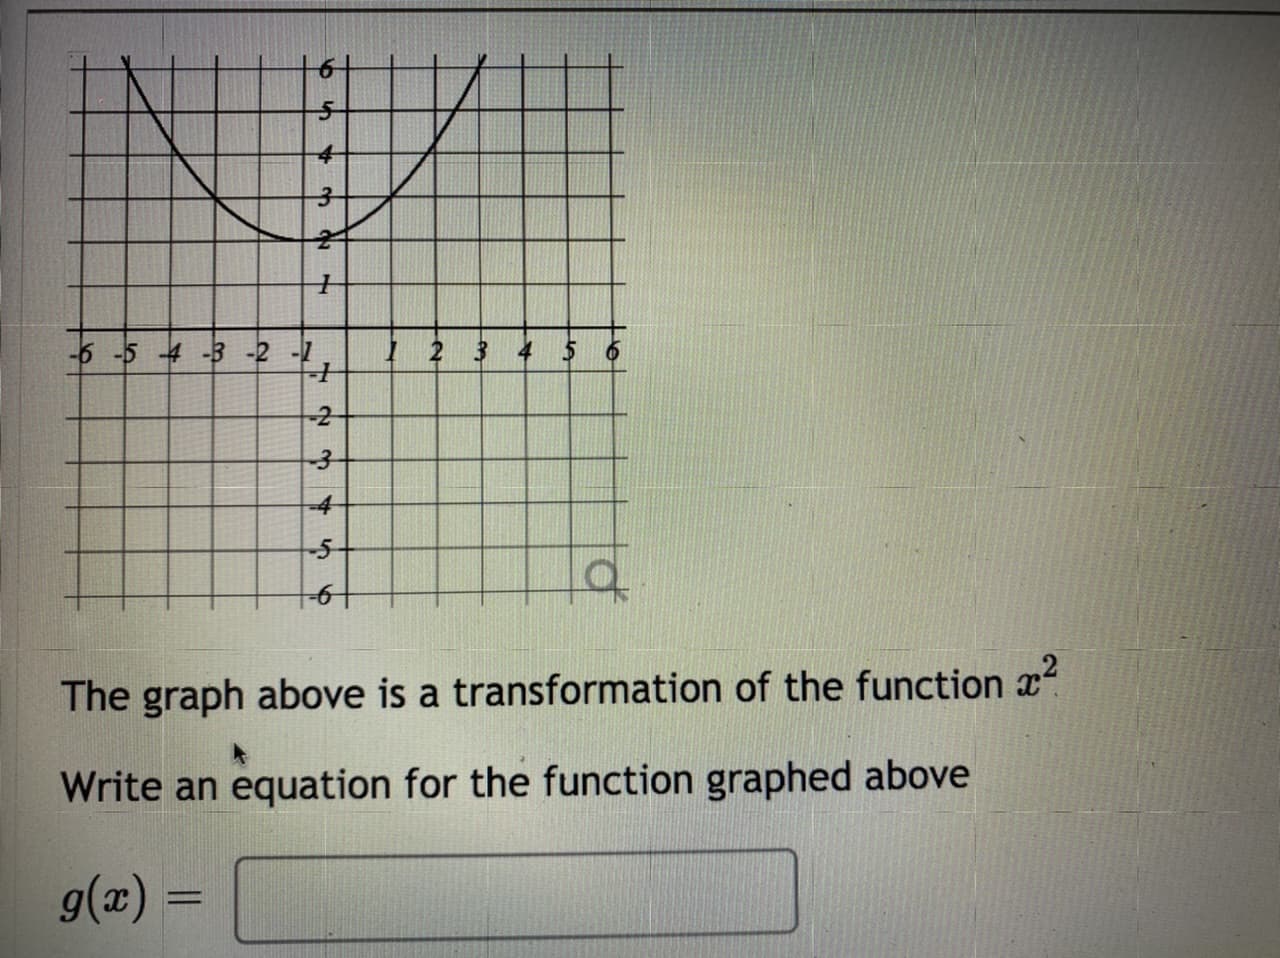 -6 -5 4 -3 -2 -1
! 2 3 4
-4
-5-
The graph above is a transformation of the function ?
Write an equation for the function graphed above
g(x) =
%3D
2.
